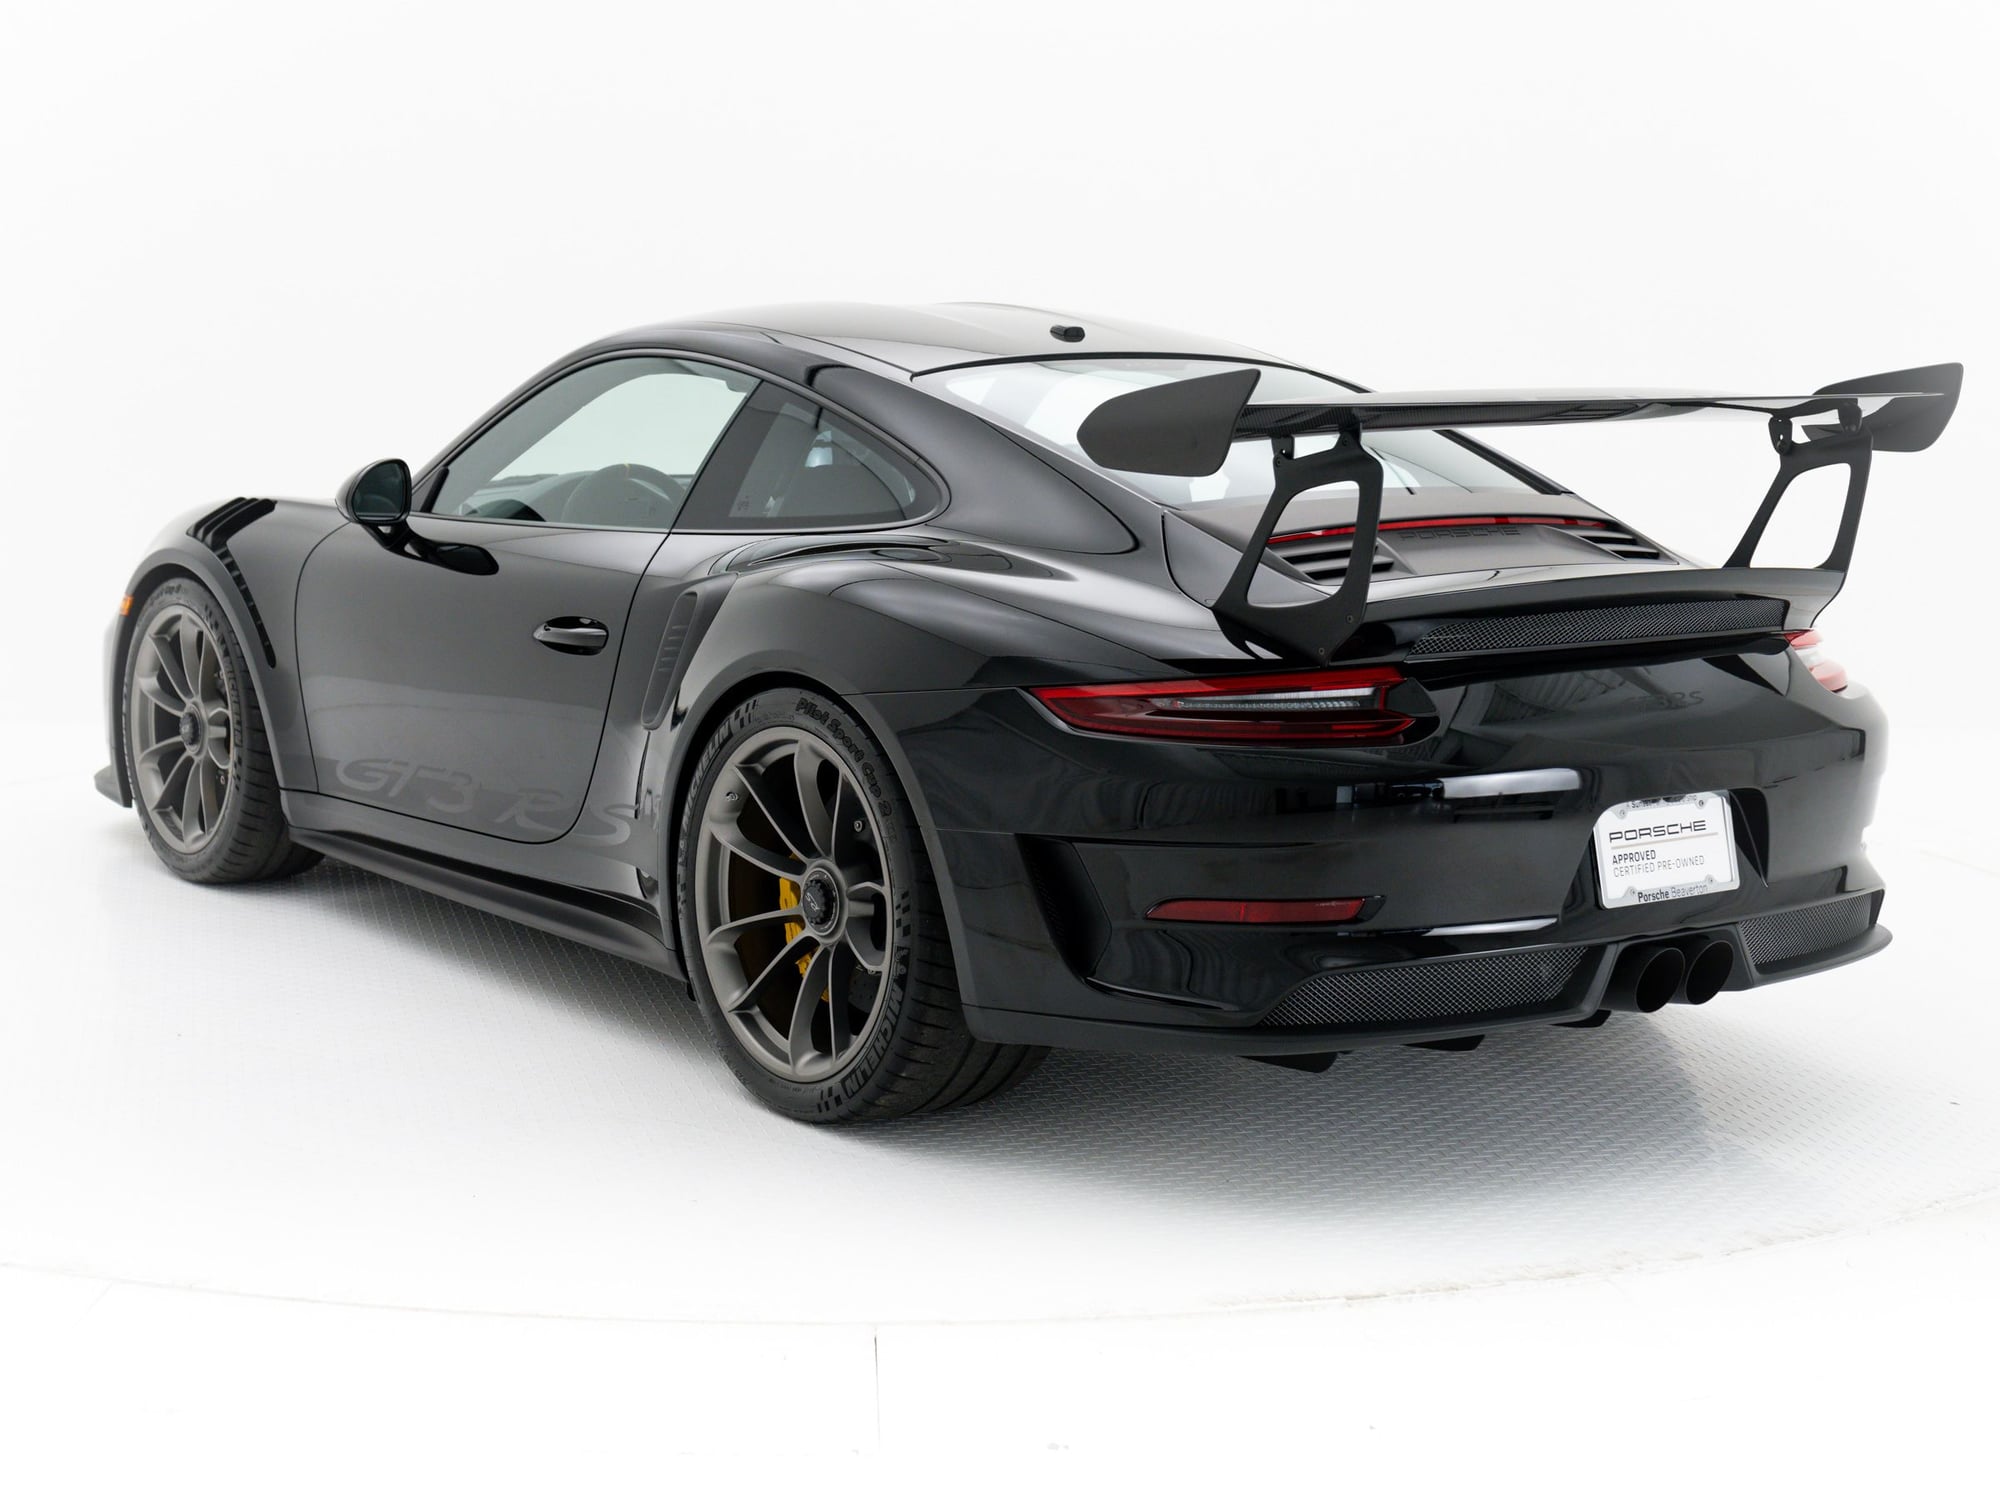 2019 Porsche GT3 - CPO: 2019 Porsche GT3 RS Black with Weissach Package - Used - VIN WP0AF2A91KS164330 - 2,025 Miles - 6 cyl - 2WD - Automatic - Coupe - Black - Beaverton, OR 97005, United States